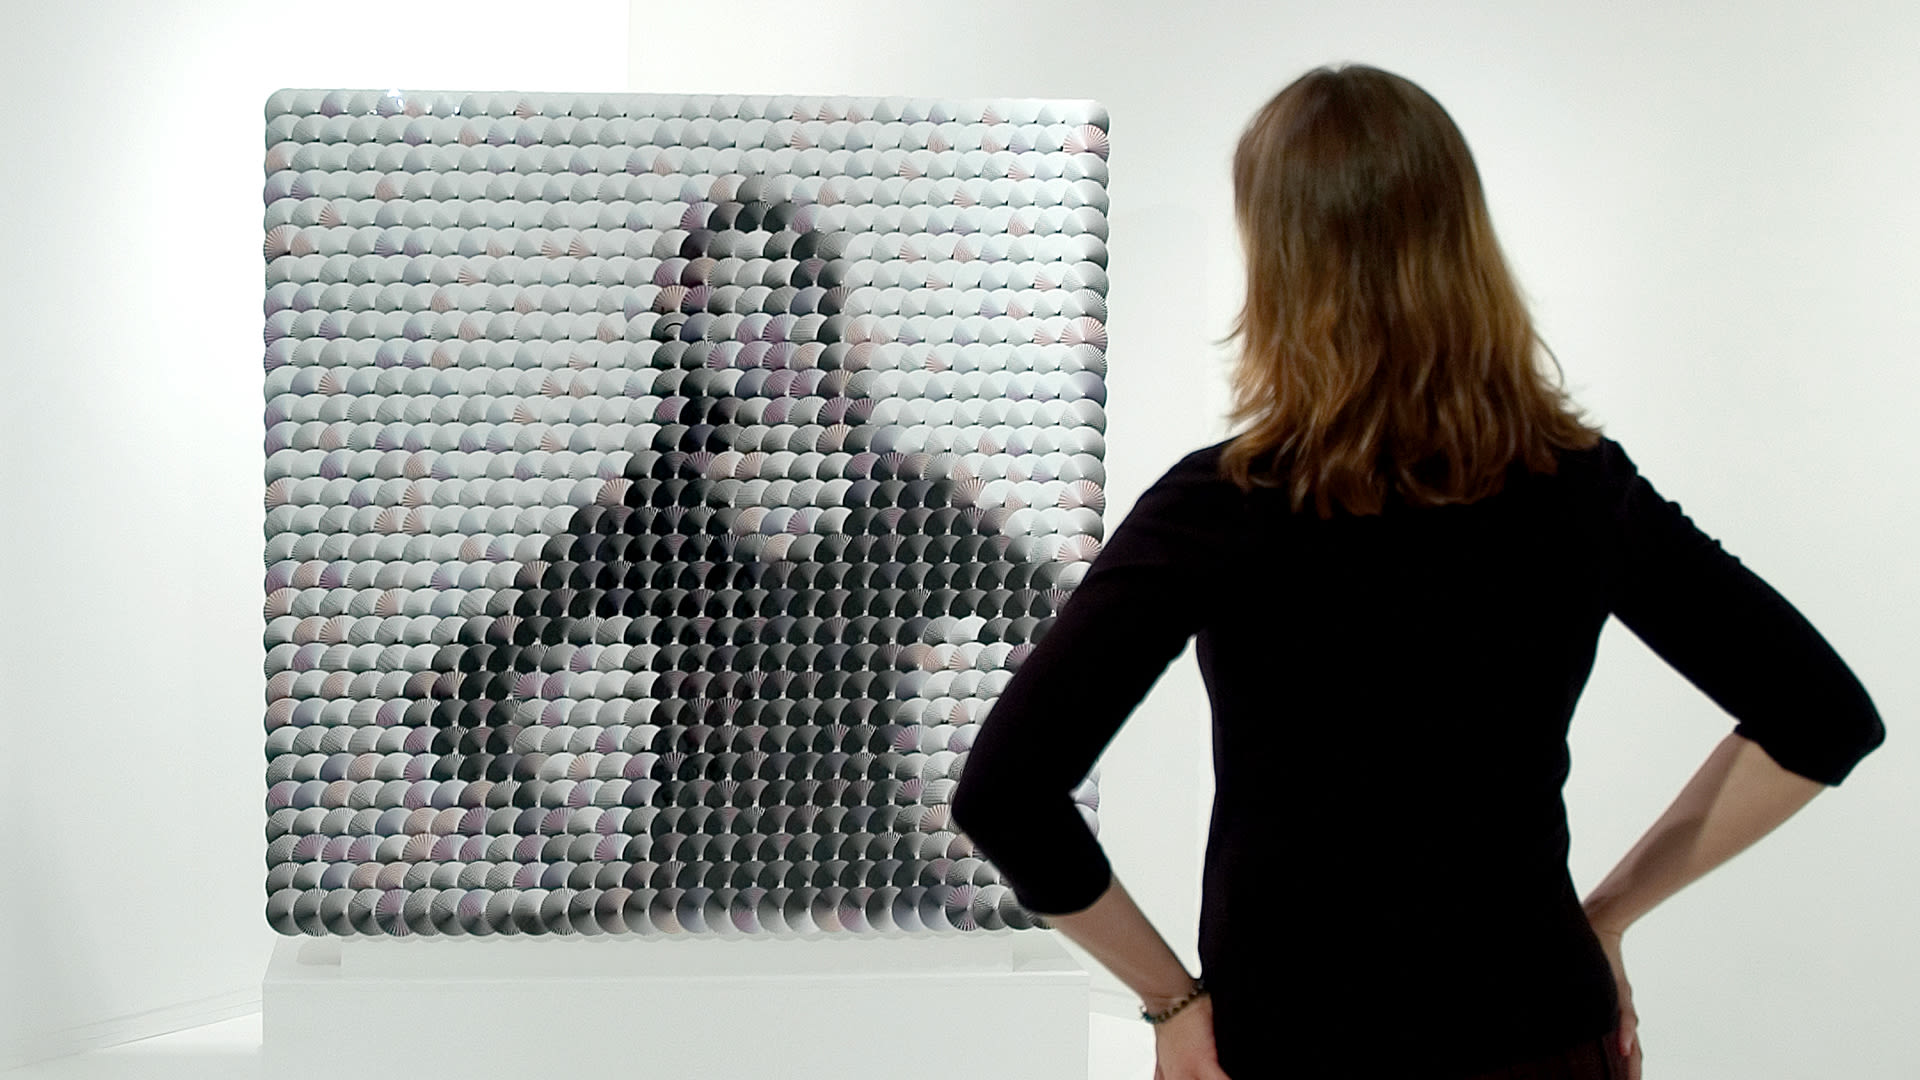 Watch How This Artist Makes Mirrors Out of Pompoms and Wooden Tiles, Obsessed